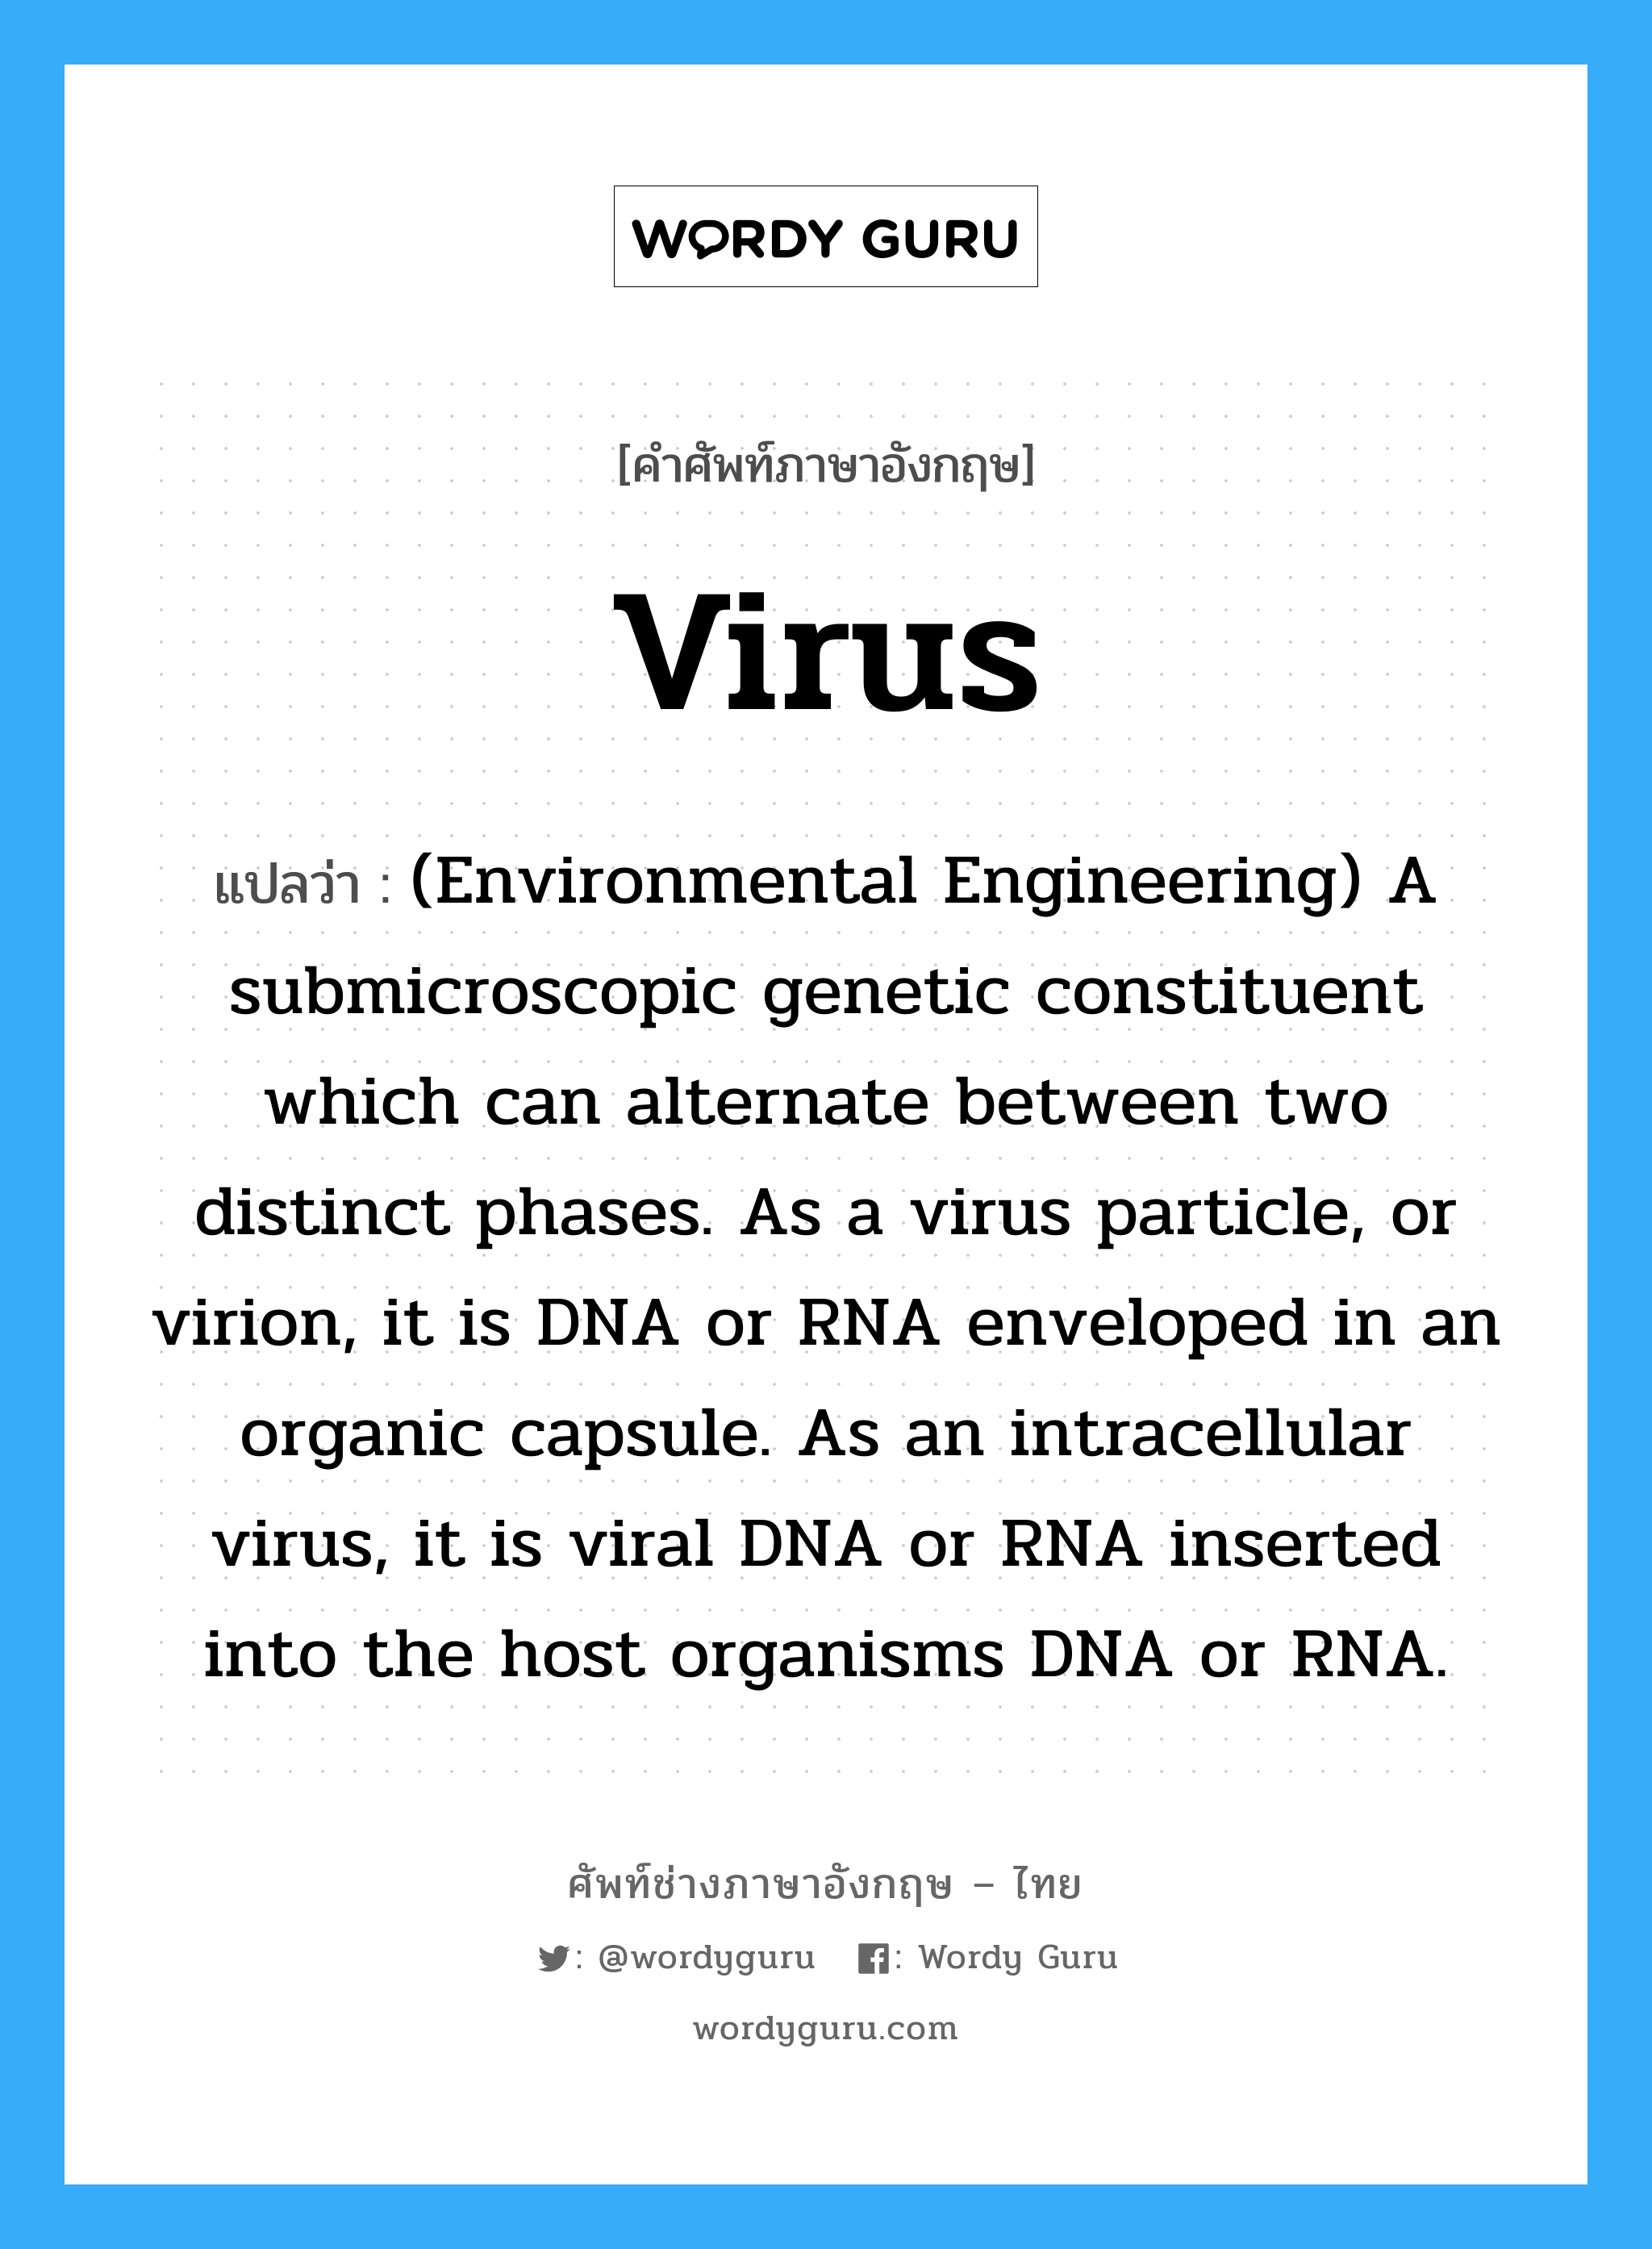 Virus แปลว่า?, คำศัพท์ช่างภาษาอังกฤษ - ไทย Virus คำศัพท์ภาษาอังกฤษ Virus แปลว่า (Environmental Engineering) A submicroscopic genetic constituent which can alternate between two distinct phases. As a virus particle, or virion, it is DNA or RNA enveloped in an organic capsule. As an intracellular virus, it is viral DNA or RNA inserted into the host organisms DNA or RNA.